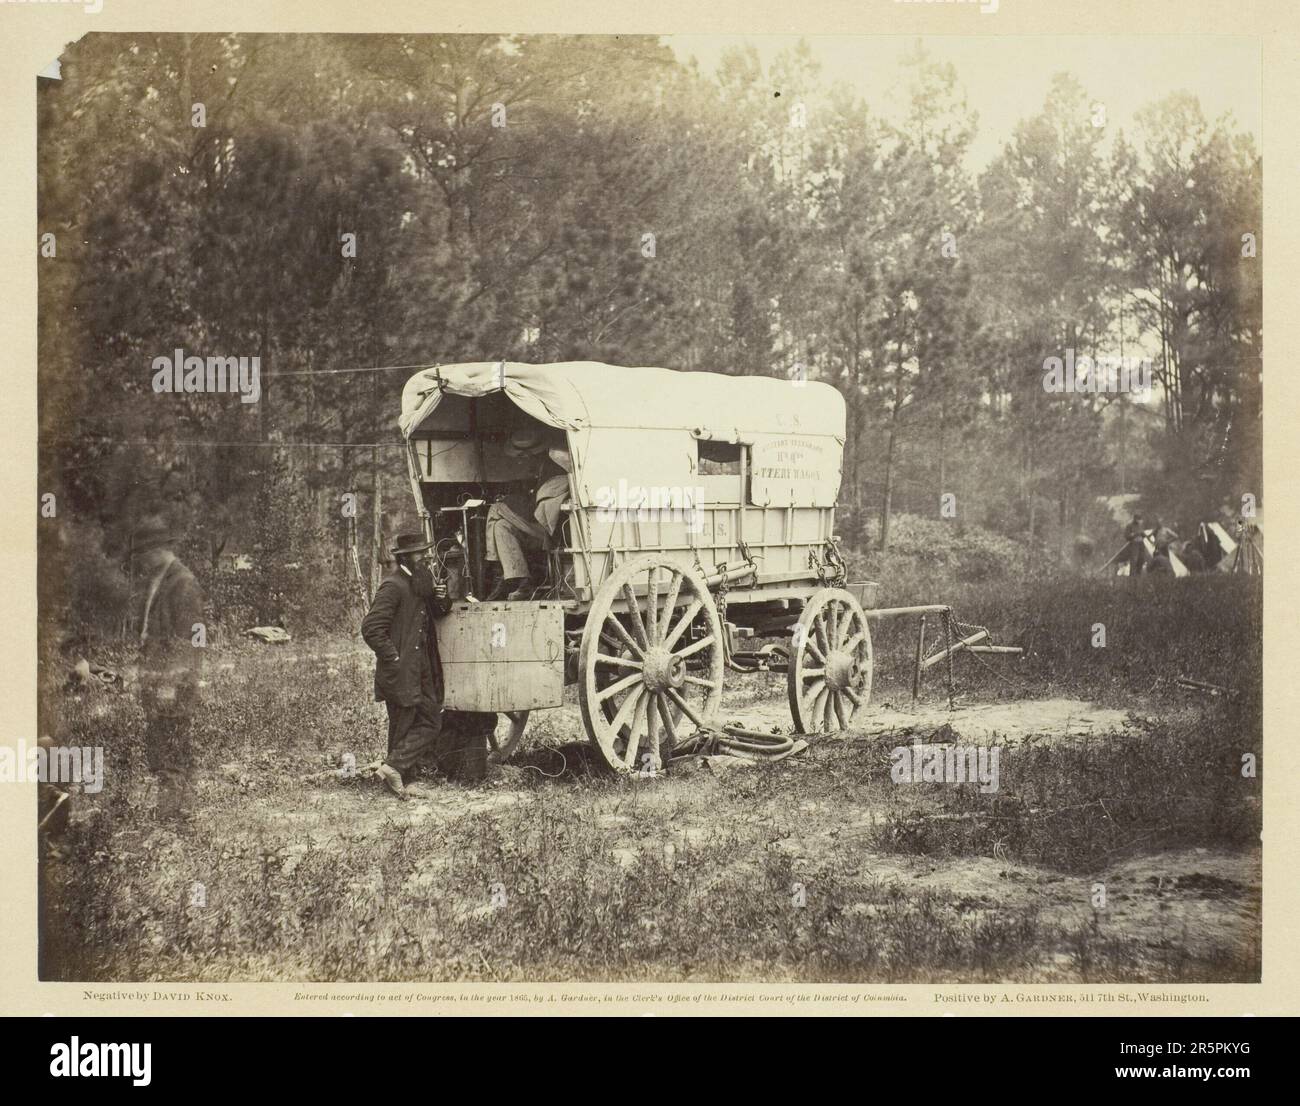 Field Telegraph, Battery Wagon Date: Septembre 1864 artiste: David KNOX American, active 19th Century Banque D'Images